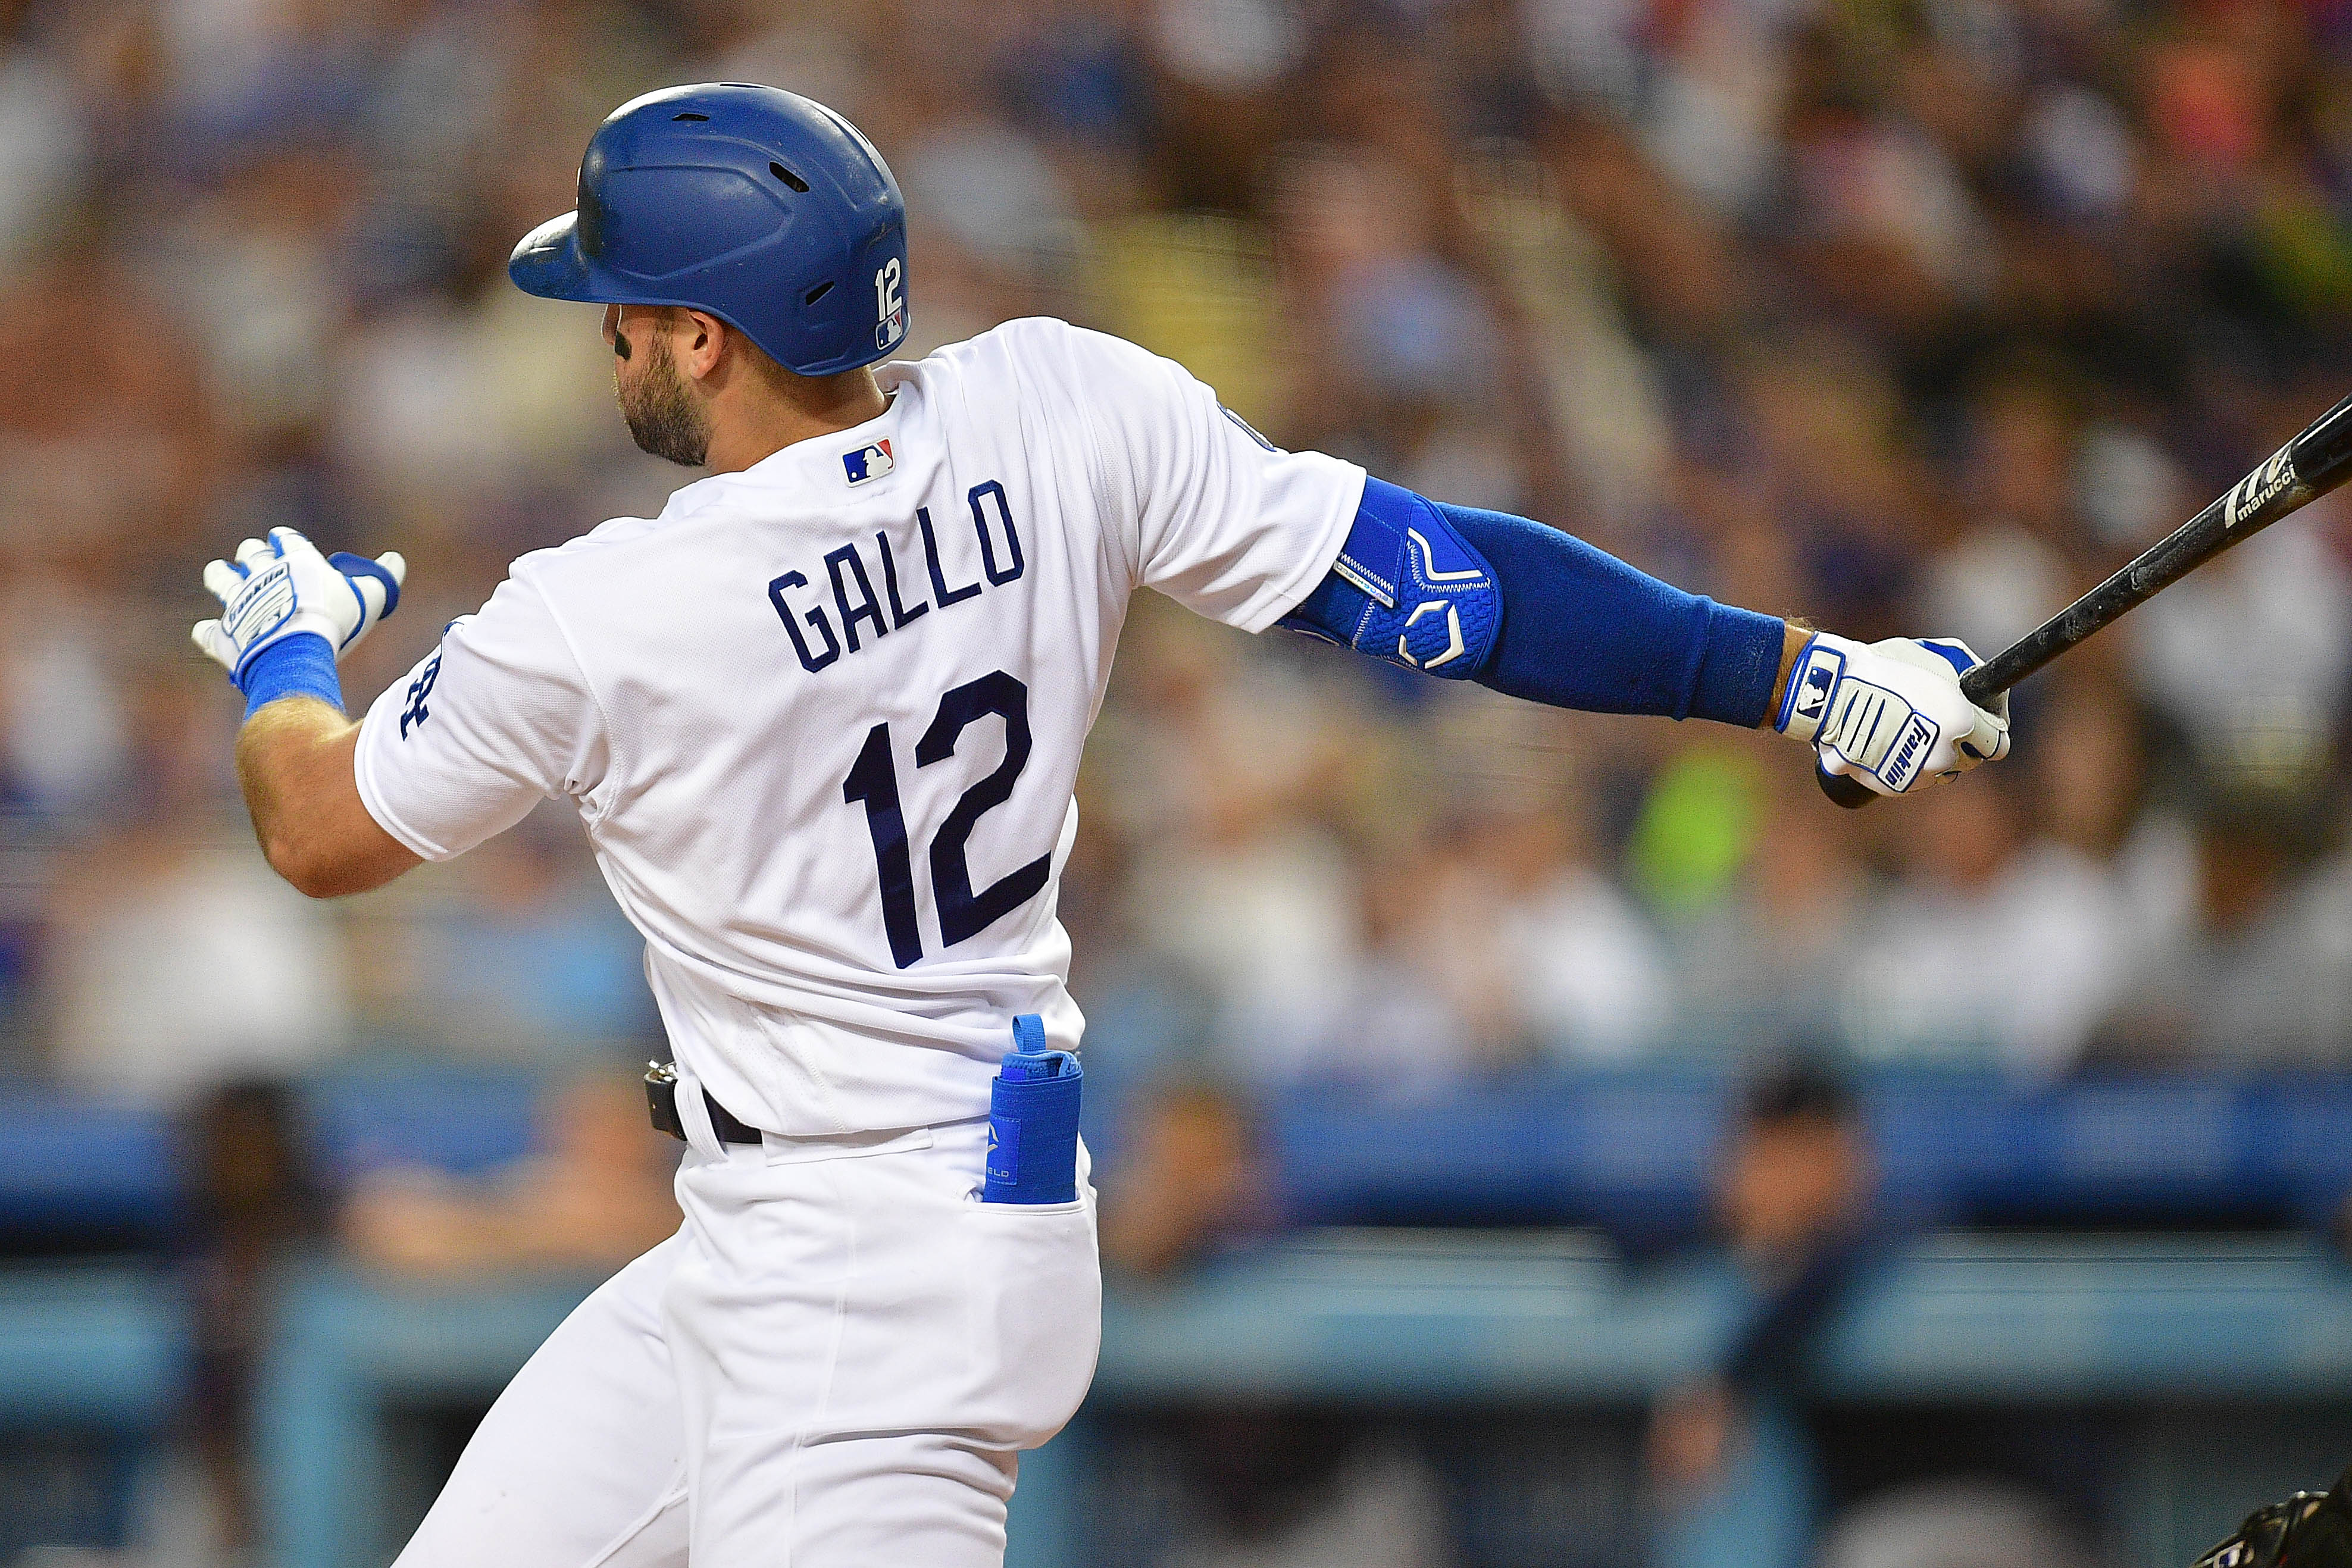 RUMOR: The three teams interested trade for Yankees' Joey Gallo